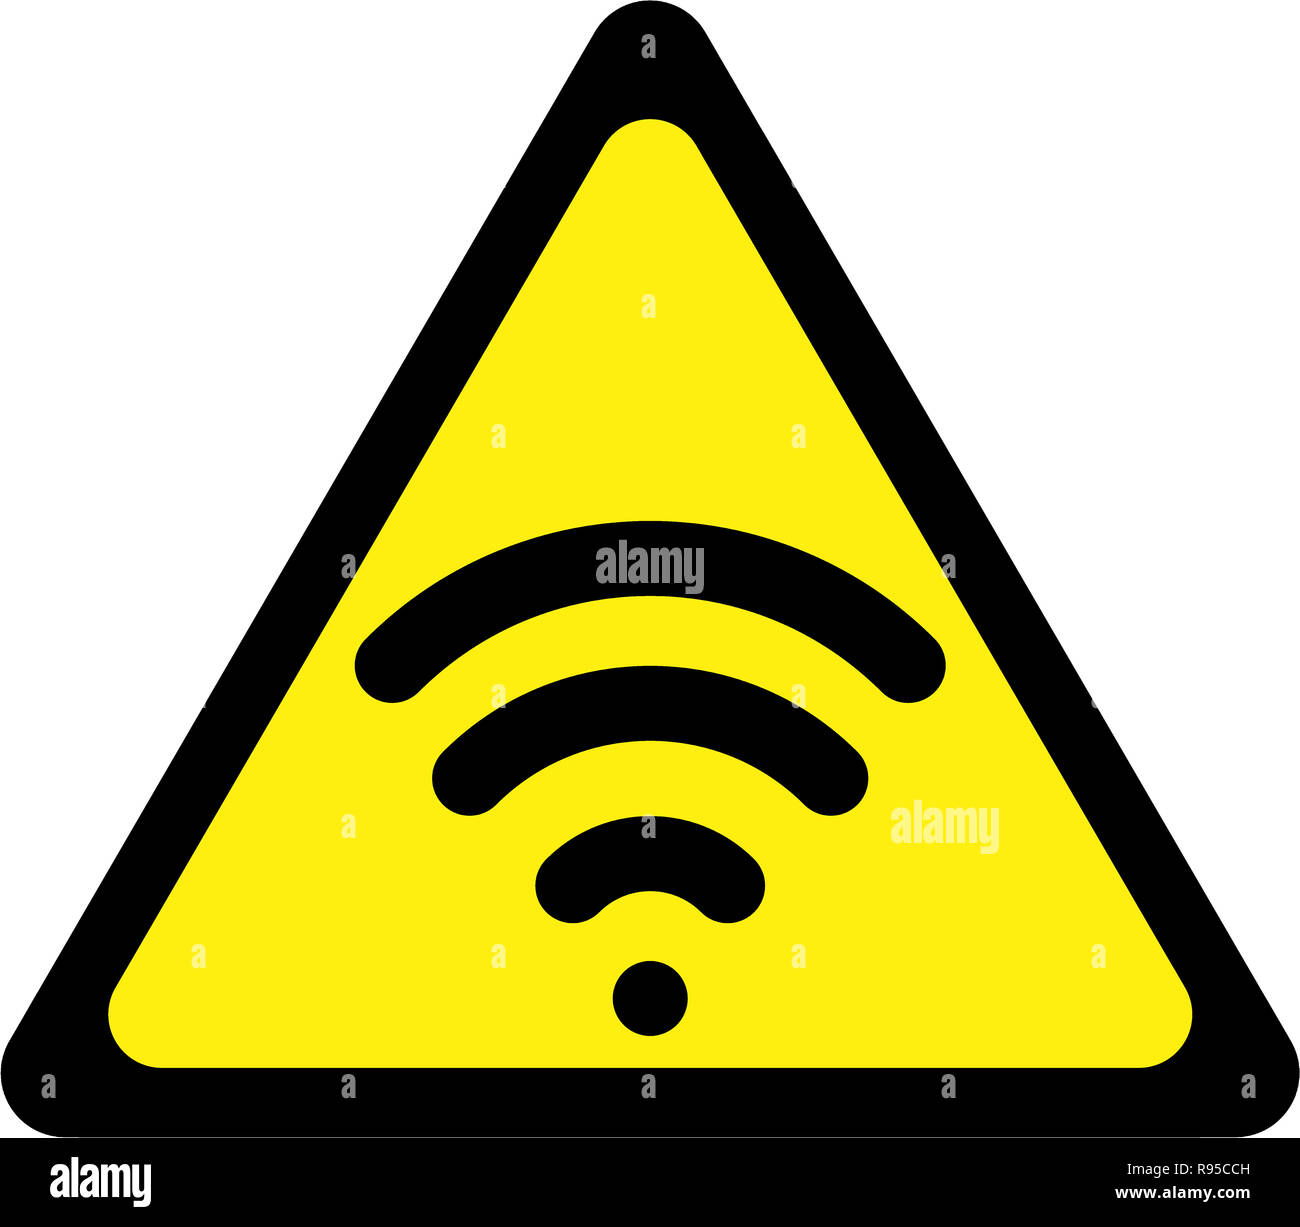 Warning sign with wireless symbol Stock Photo